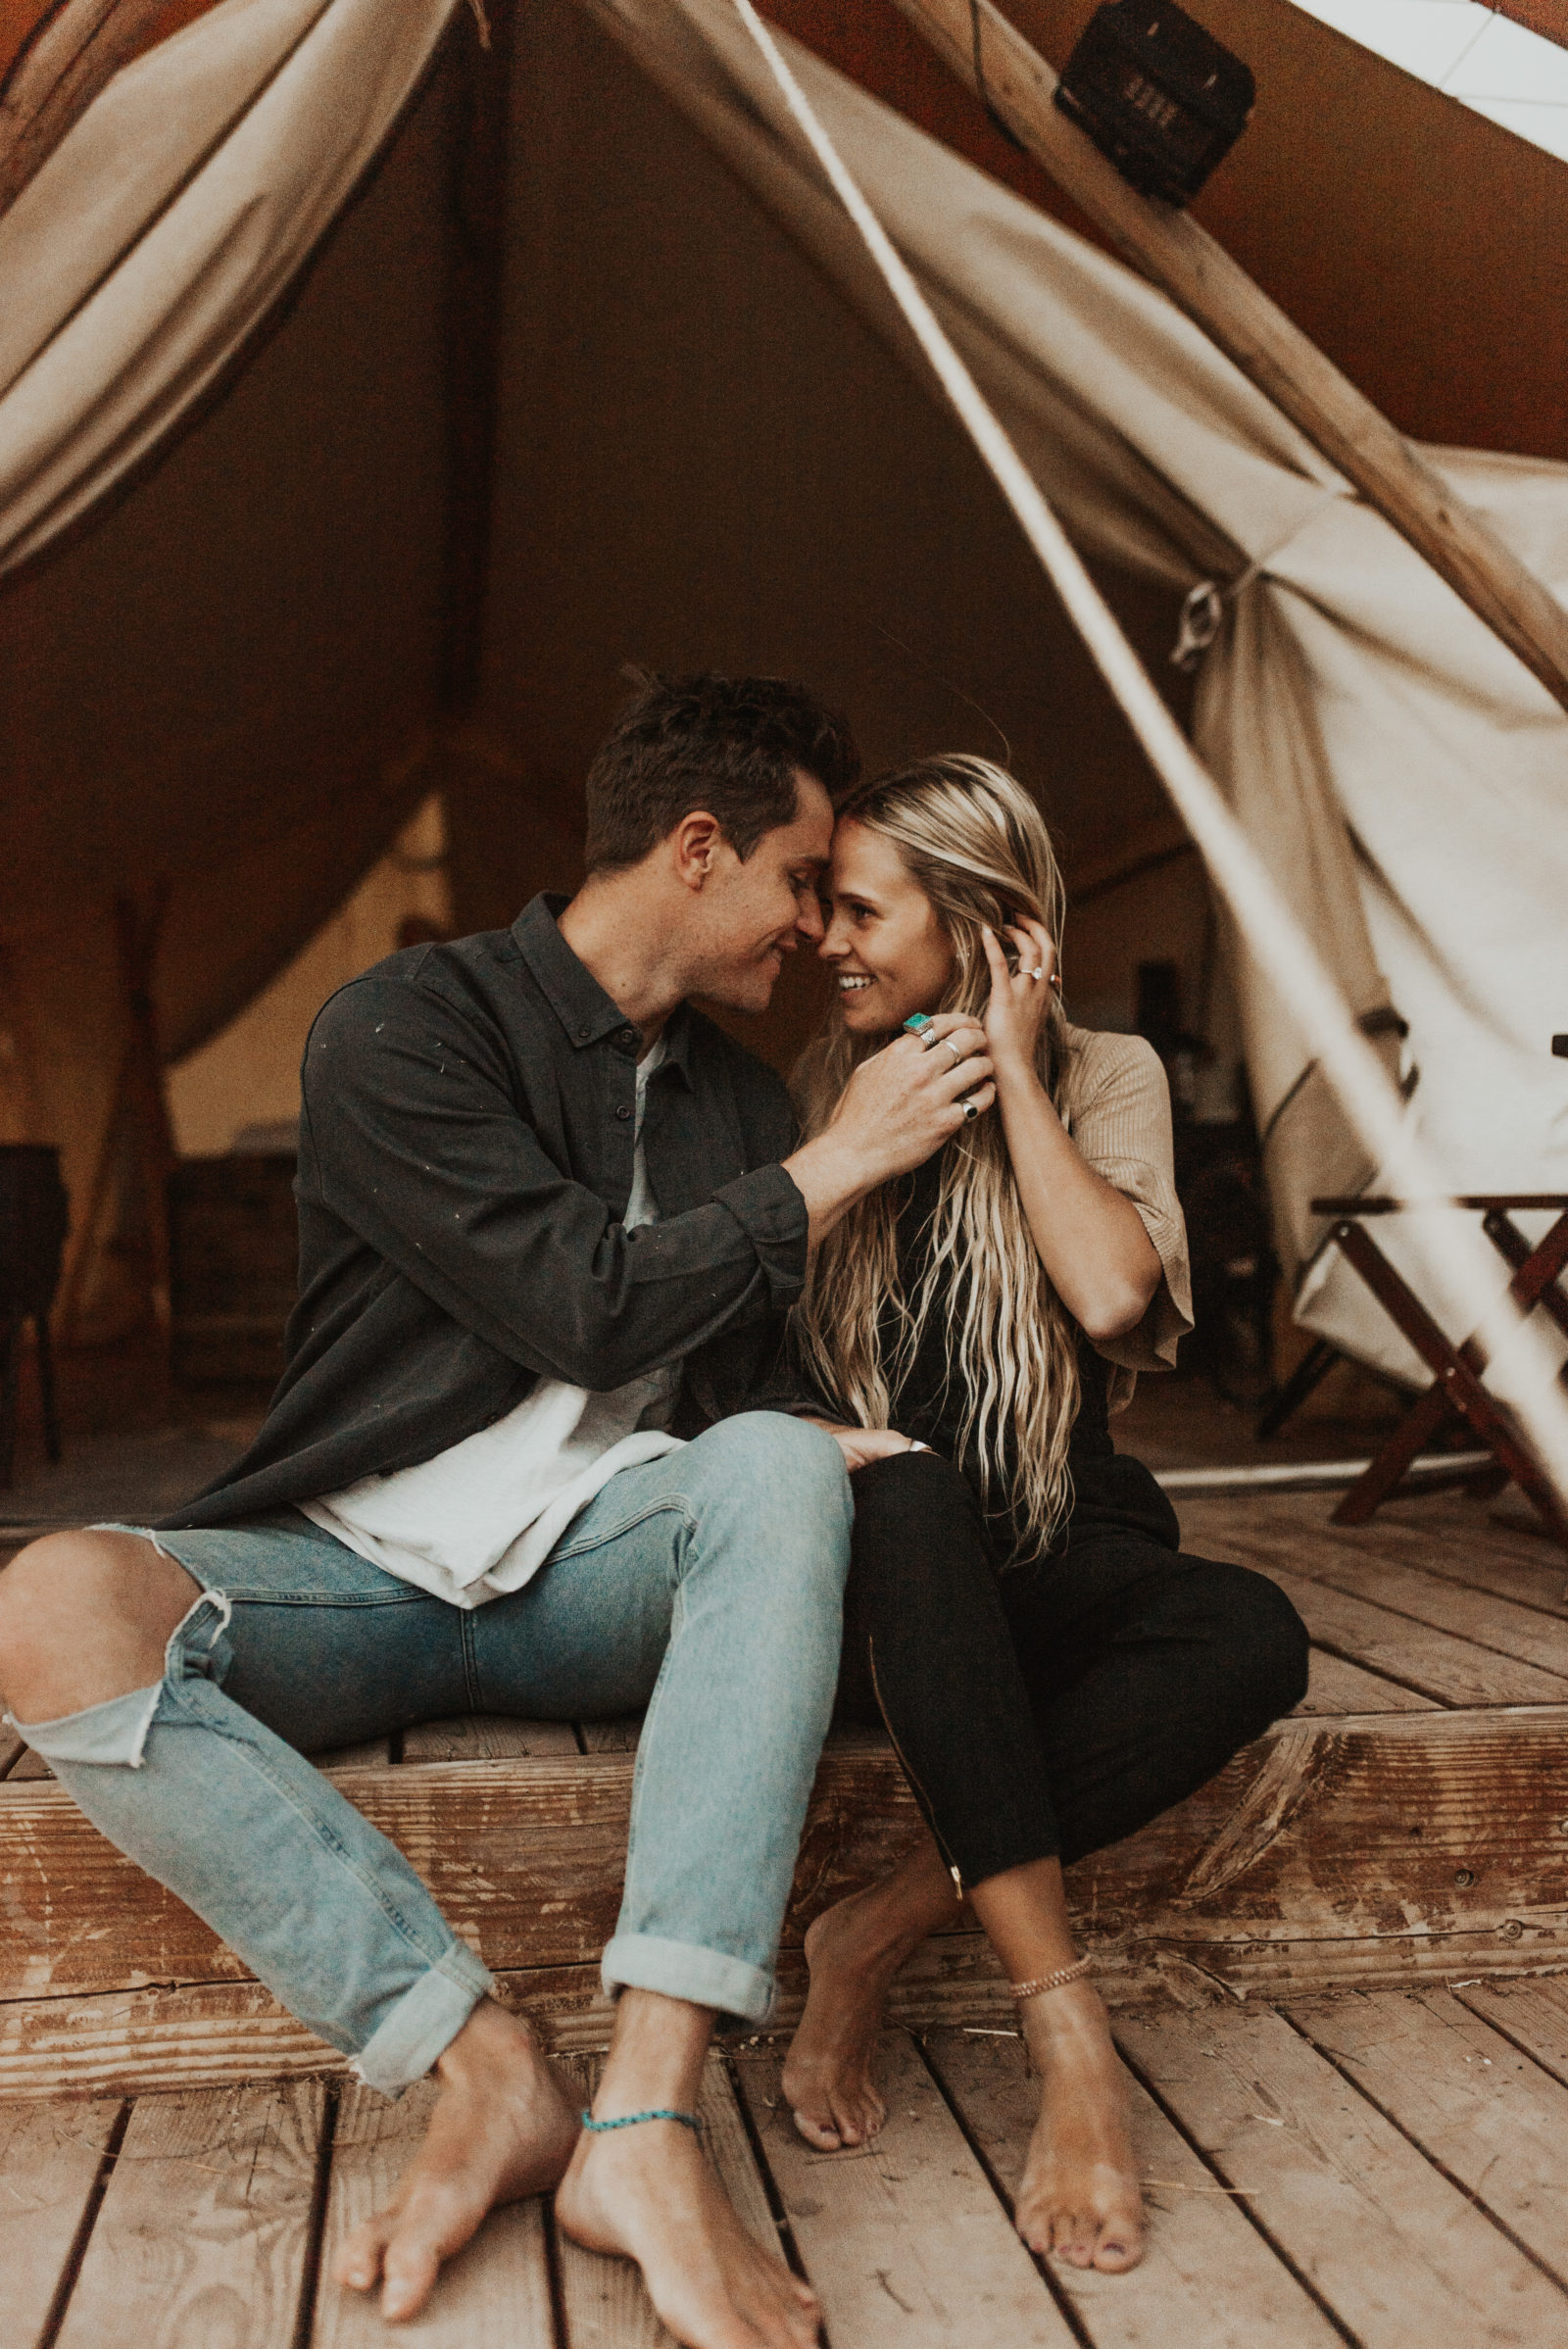 http://www.sydneemarie.com/wp-content/uploads/2019/06/Sydnee-Marie-Photography-Zion-National-Park-engagement-session_-1600x2397.jpg